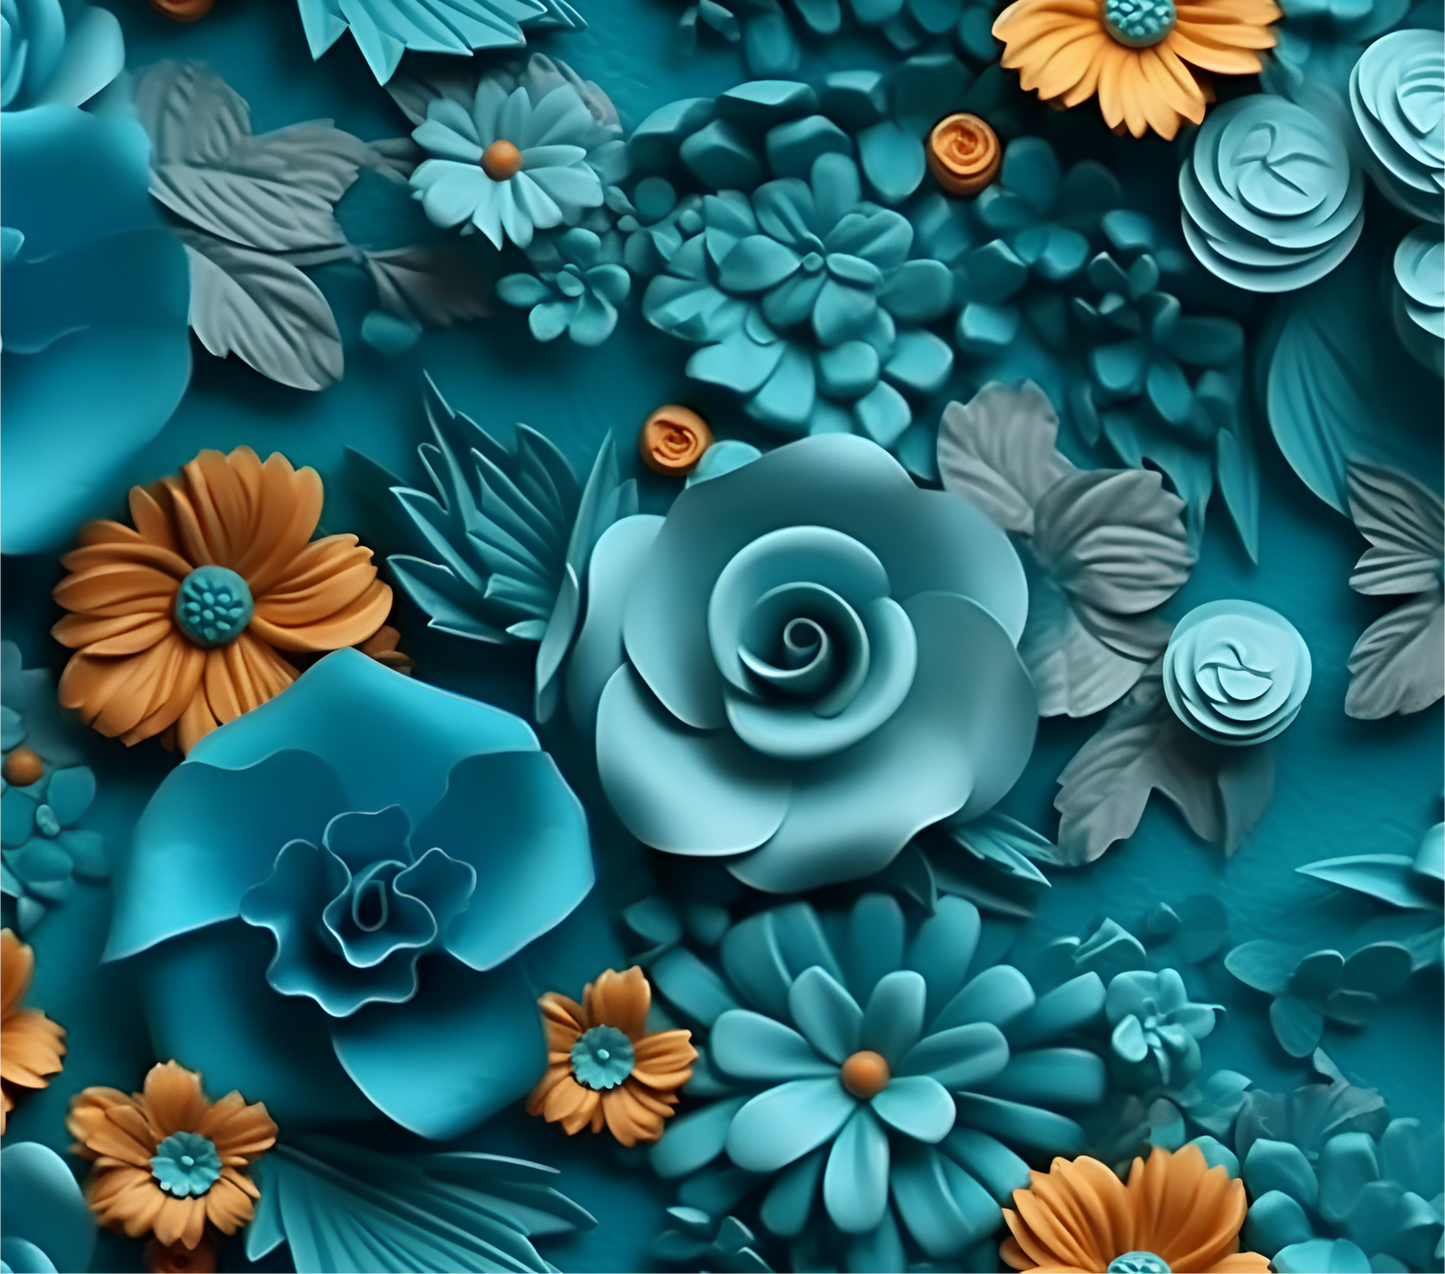 3D TURQUOISE AND GOLD FLOWERS